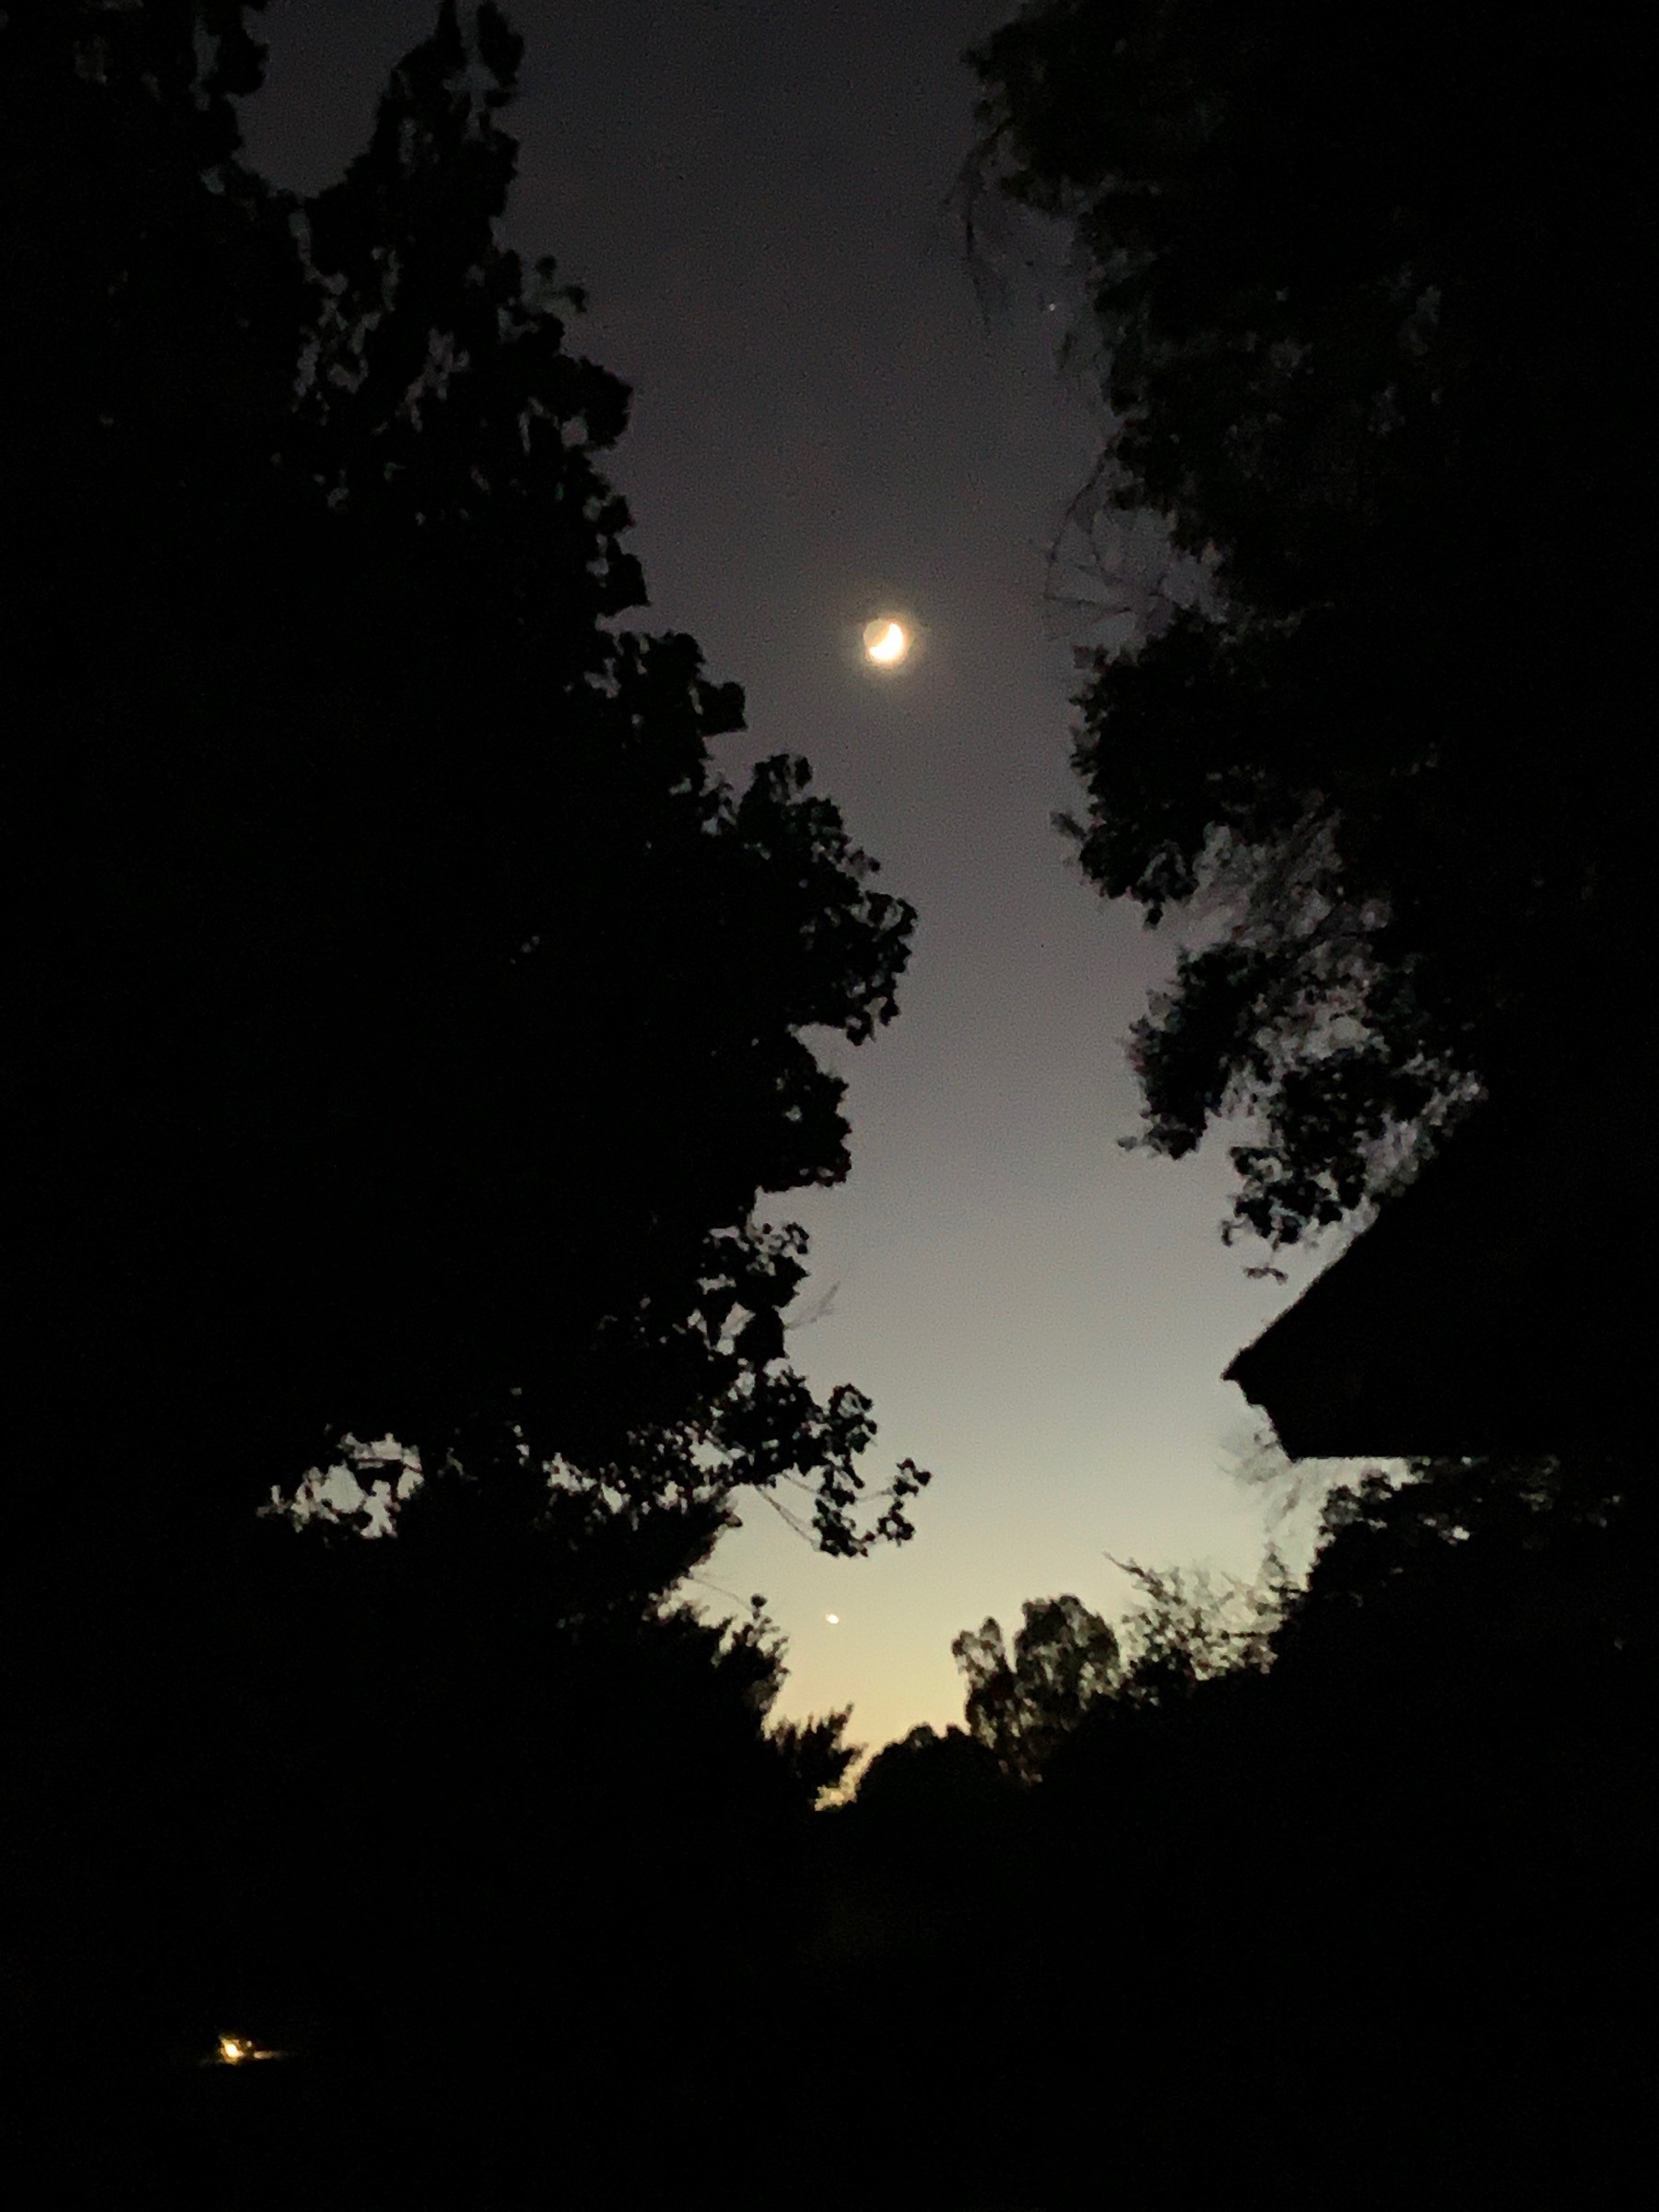 moon and night sky seen through break in shadowed tree silloutes 